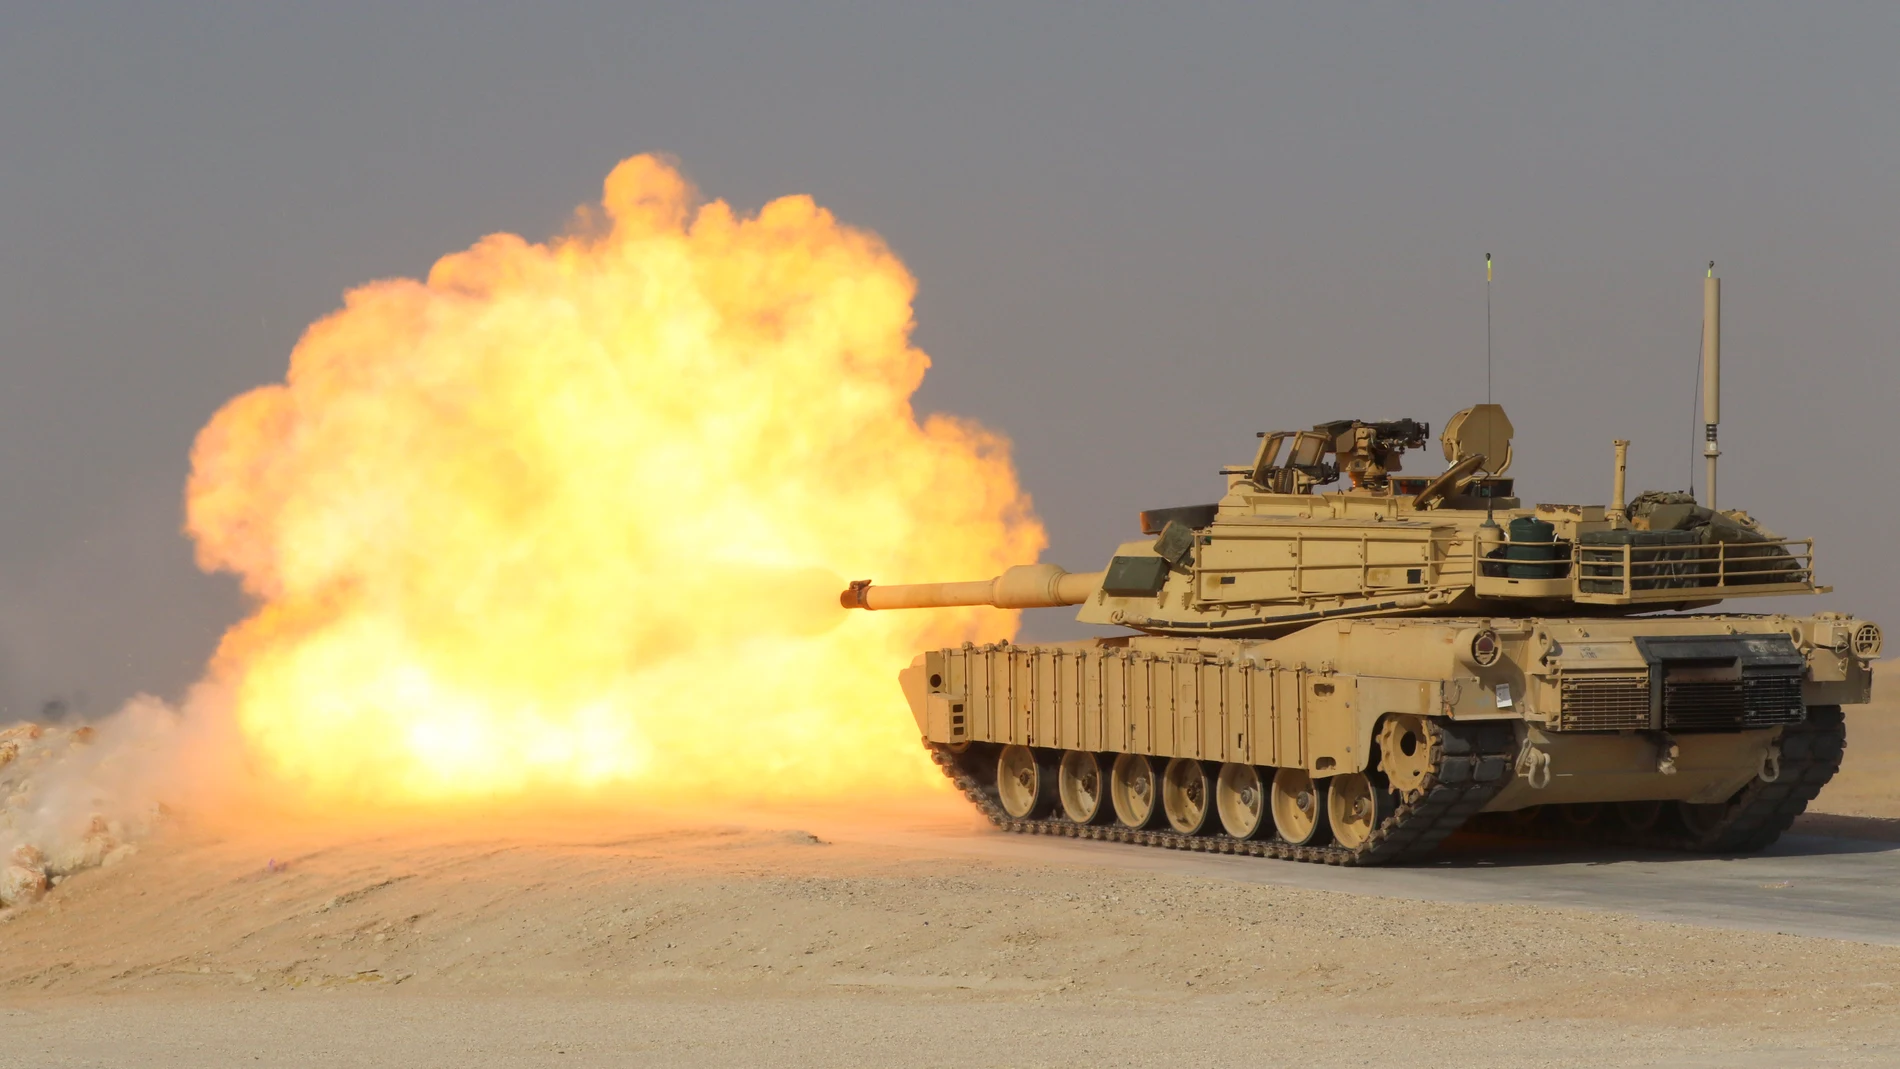 August 16, 2023 - Udairi Range Complex, Kuwait - An M1A2 Abrams tank assigned to the 98th Cavalry Regiment, fires a tank round at a target during a live fire qualifications at the Udairi Multi Purpose Range Complex, Kuwait, August, 2023. The M1A2 System Enhancement Package Version 2 (SEPv2) is an upgraded version of the M1 Abrams main battle tank. It features improved electronics, including updated command, control, and communication systems. (Foto de ARCHIVO)16/08/2023